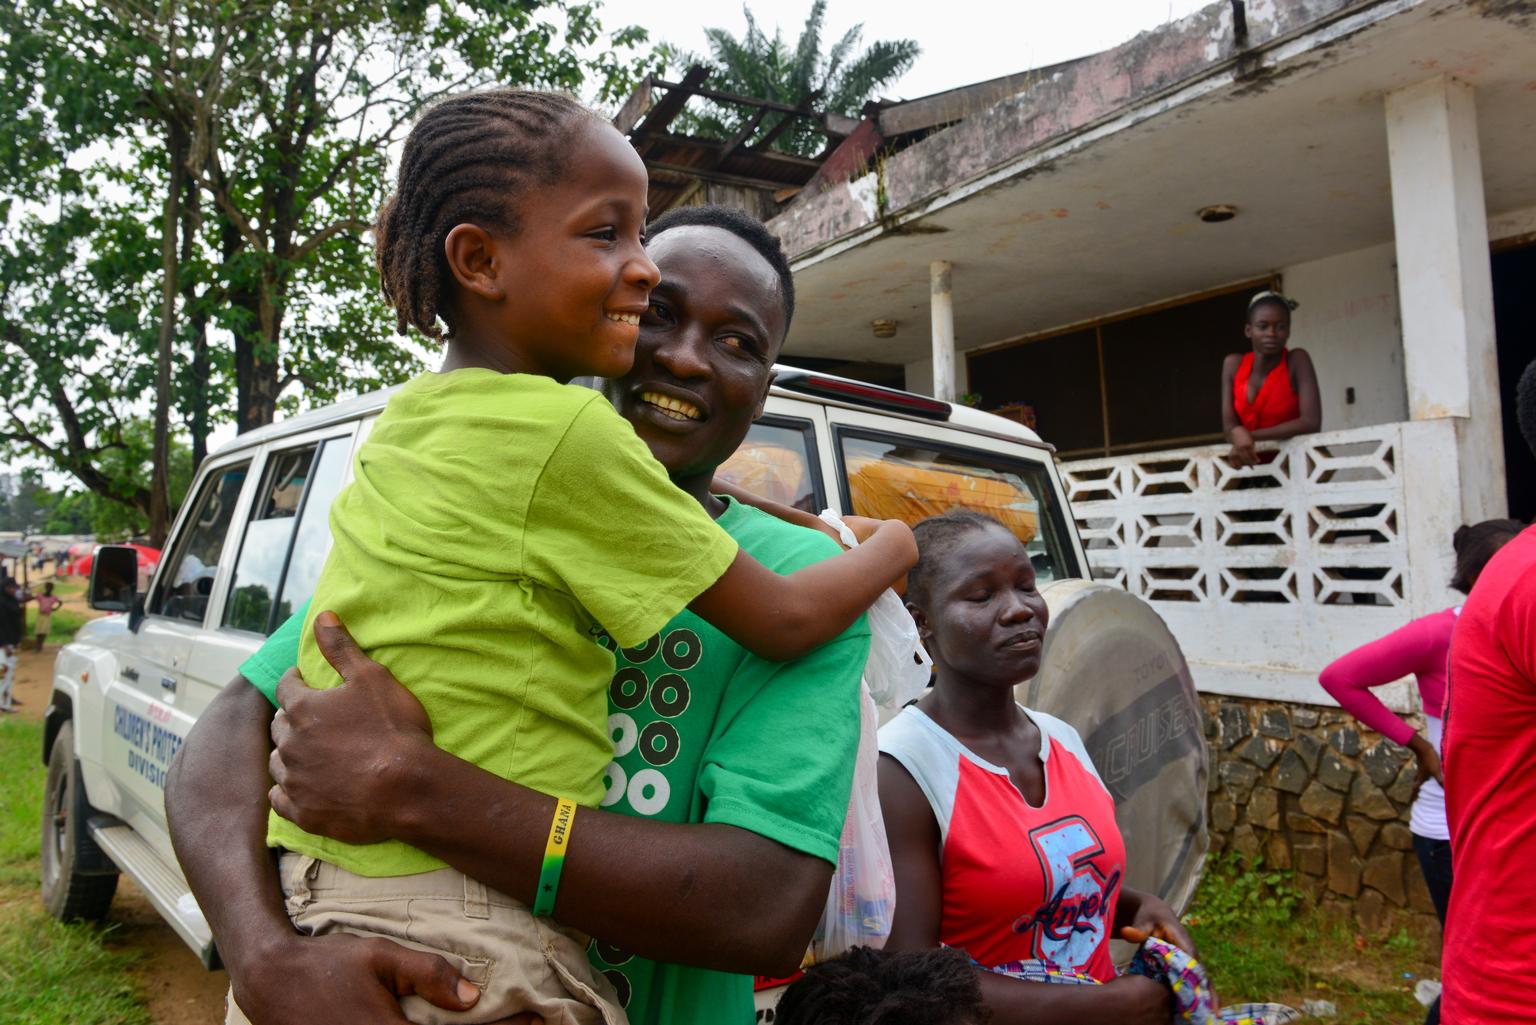 Nine-year-old Mercy, an Ebola orphan in Monrovia, Liberia, is reunited with her older brother outside a UNICEF-supported interim care center.